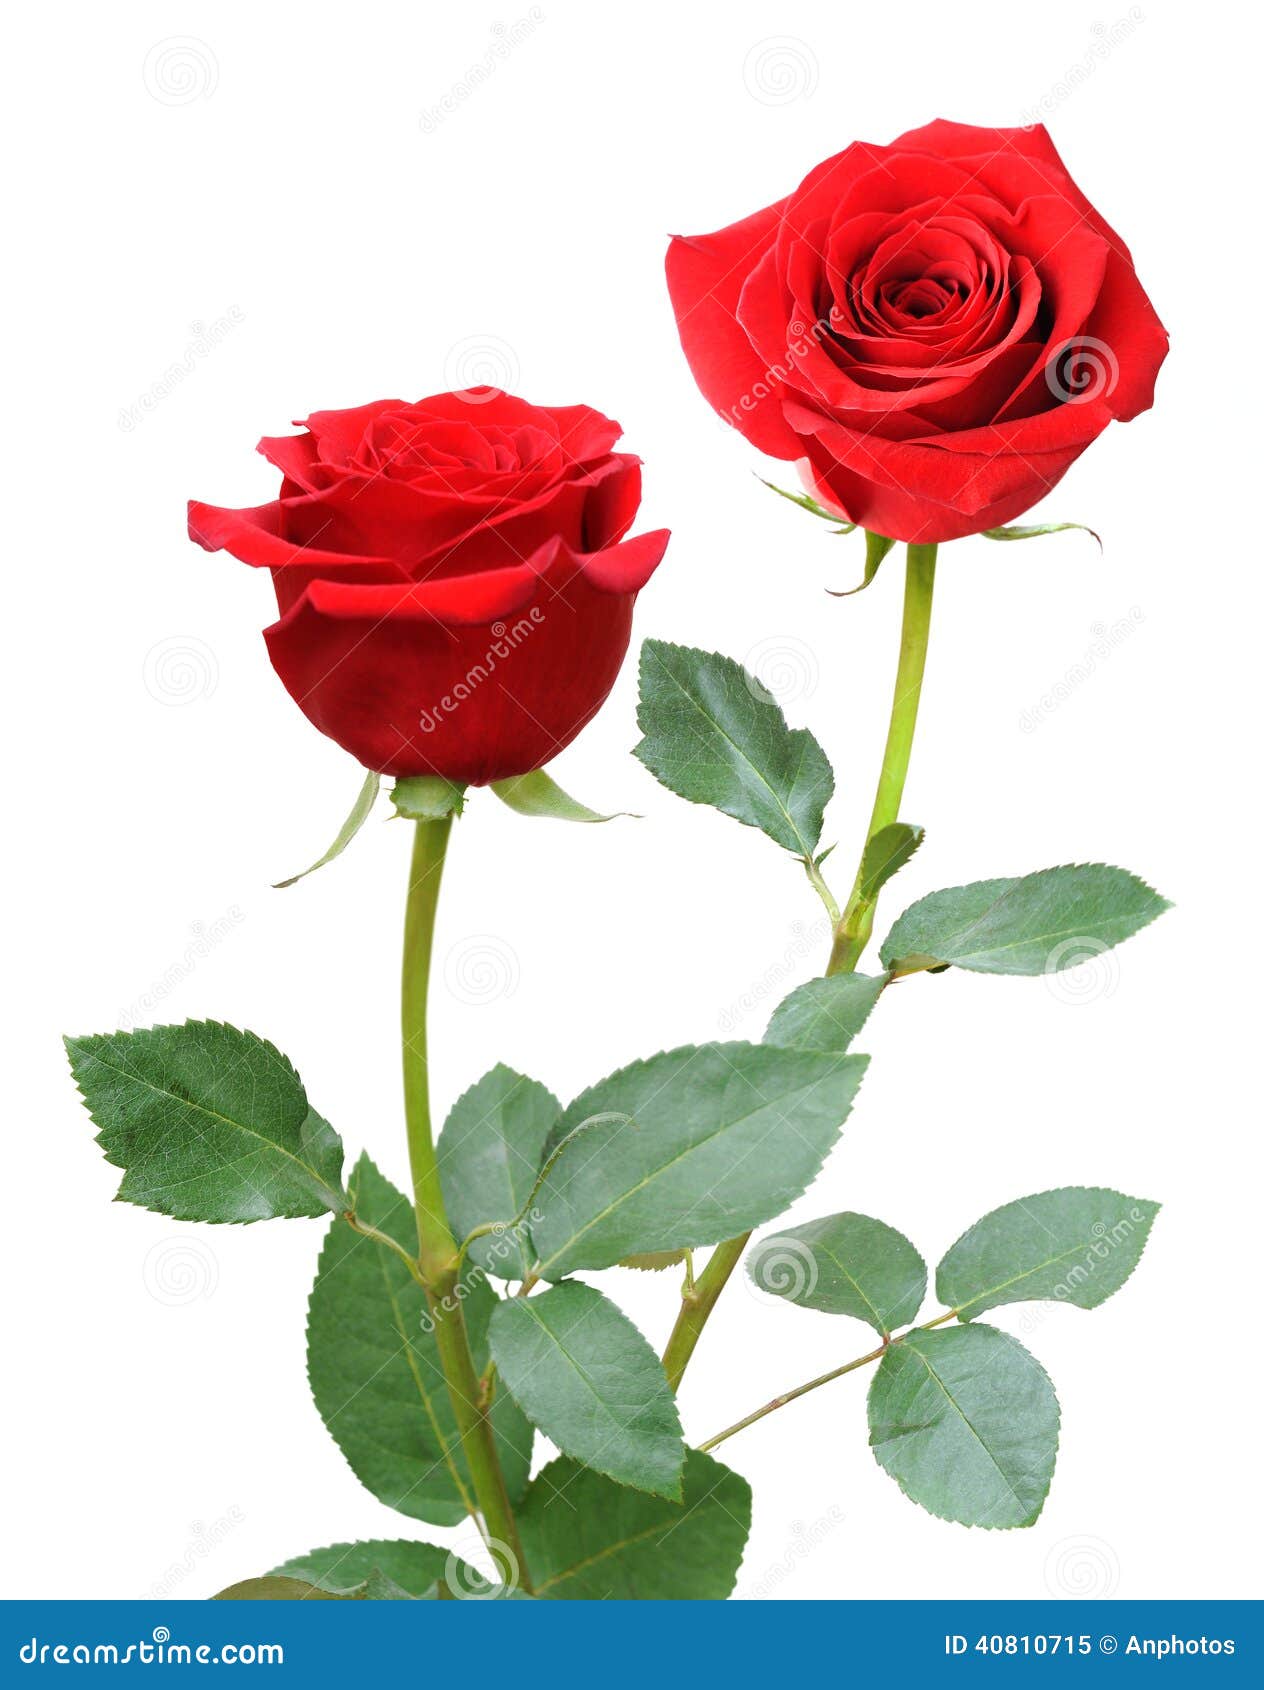 Rose flower stock image. Image of bouquet, leaf, anniversary - 40810715